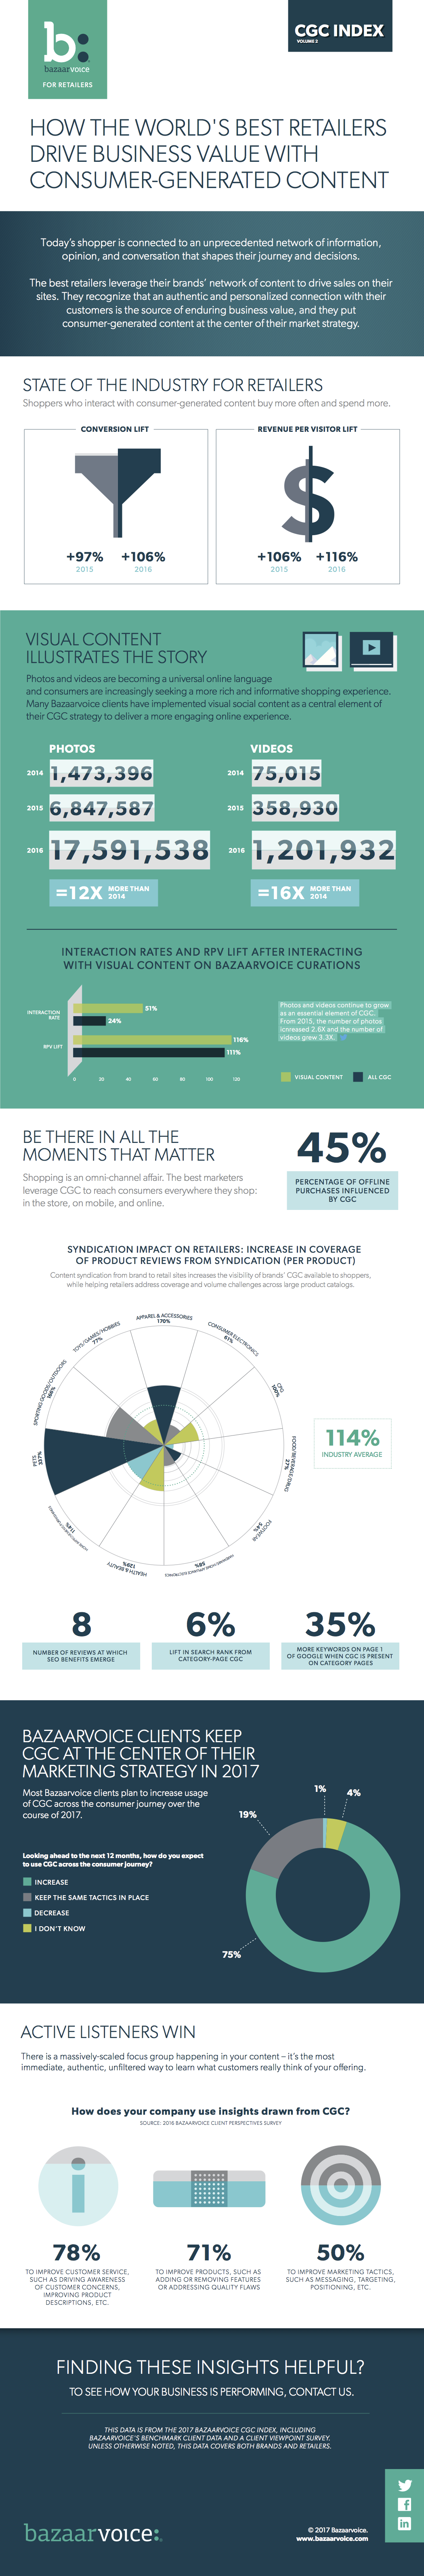 How the world's best retailers drive business value with consumer-generated content